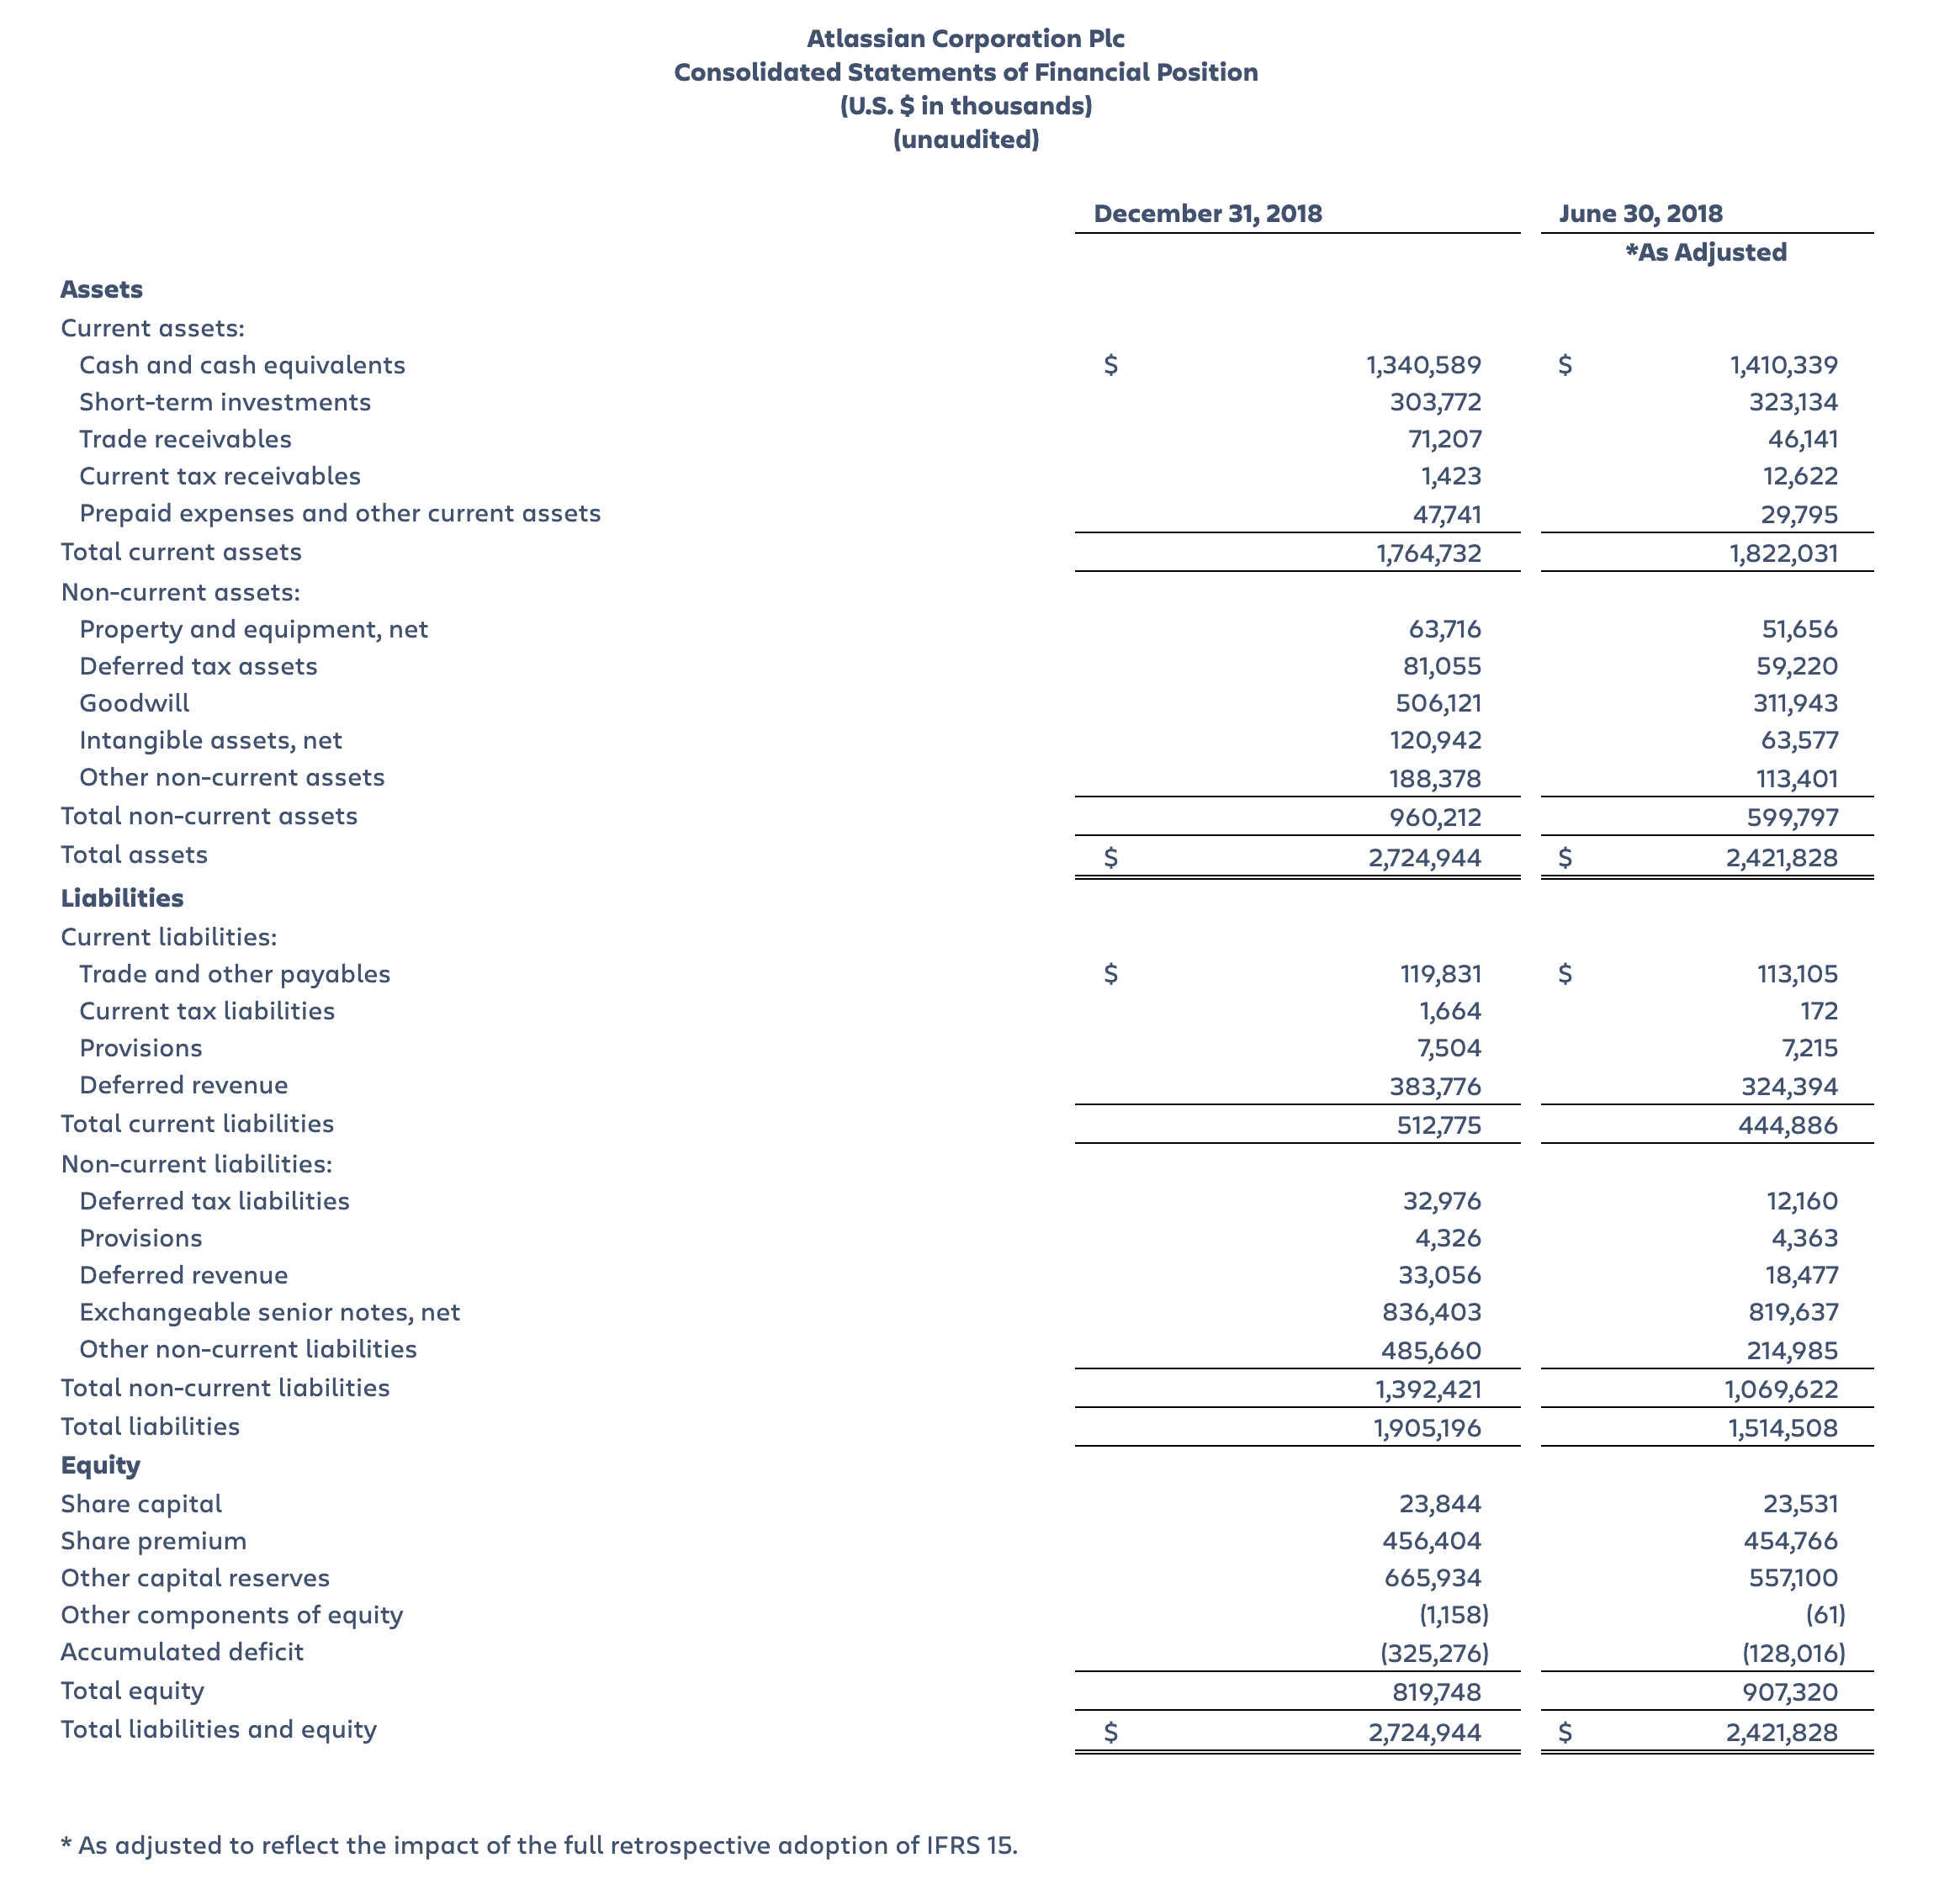 Atlassian Consolidated Statements of Financial Position, Second Quarter Fiscal Year 2019